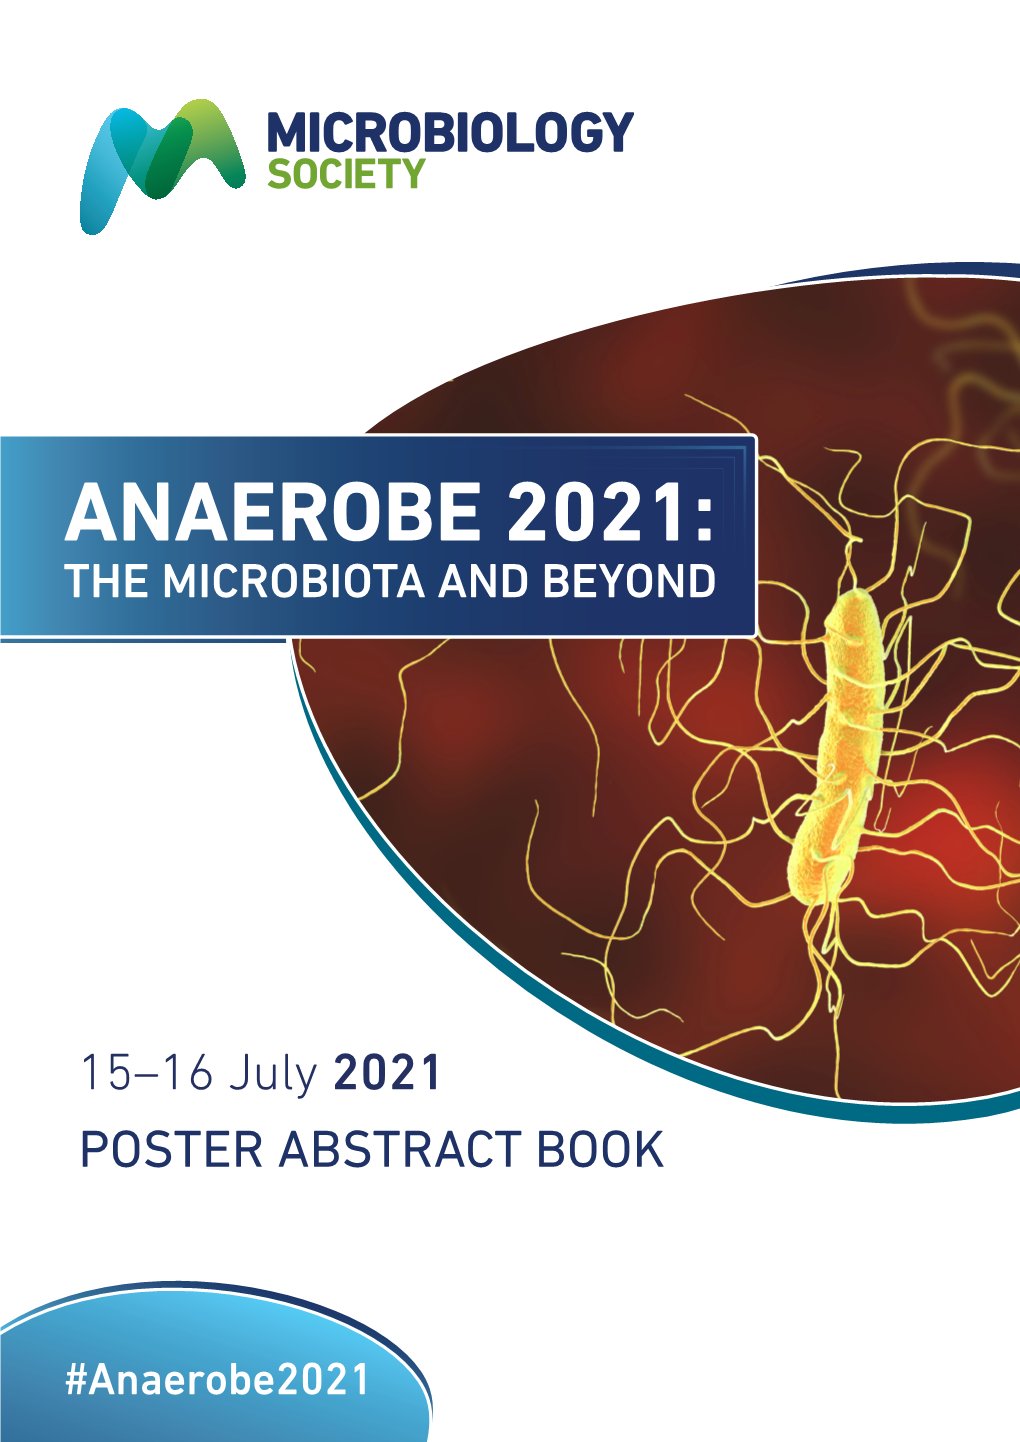 Anaerobe 2021 Poster Abstract Book